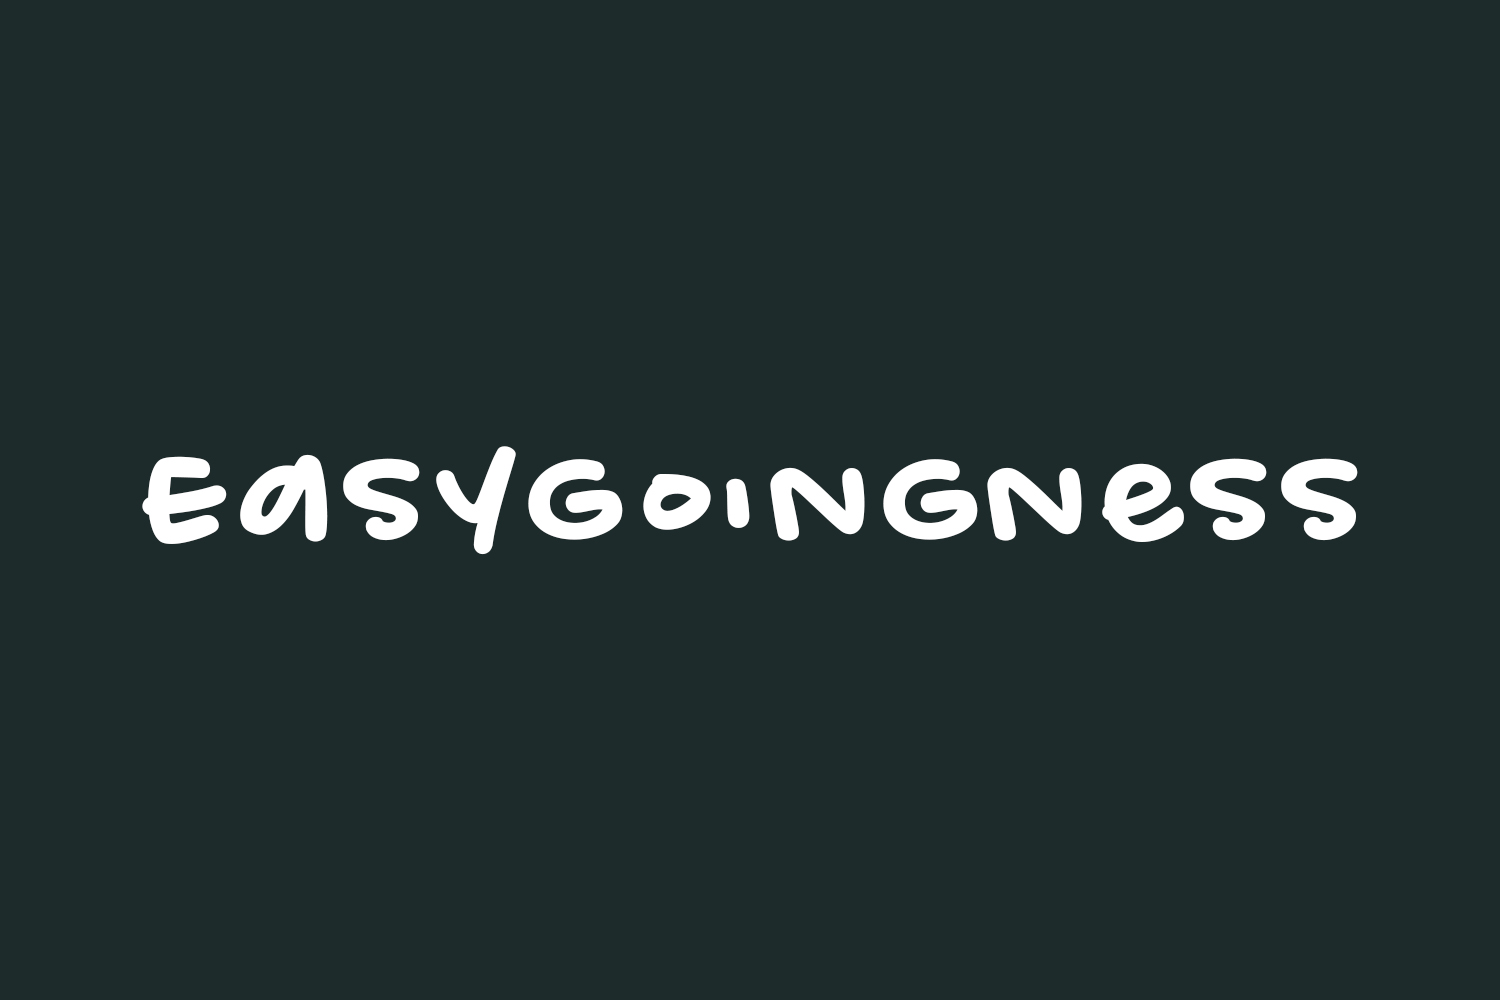 Easygoingness Free Font